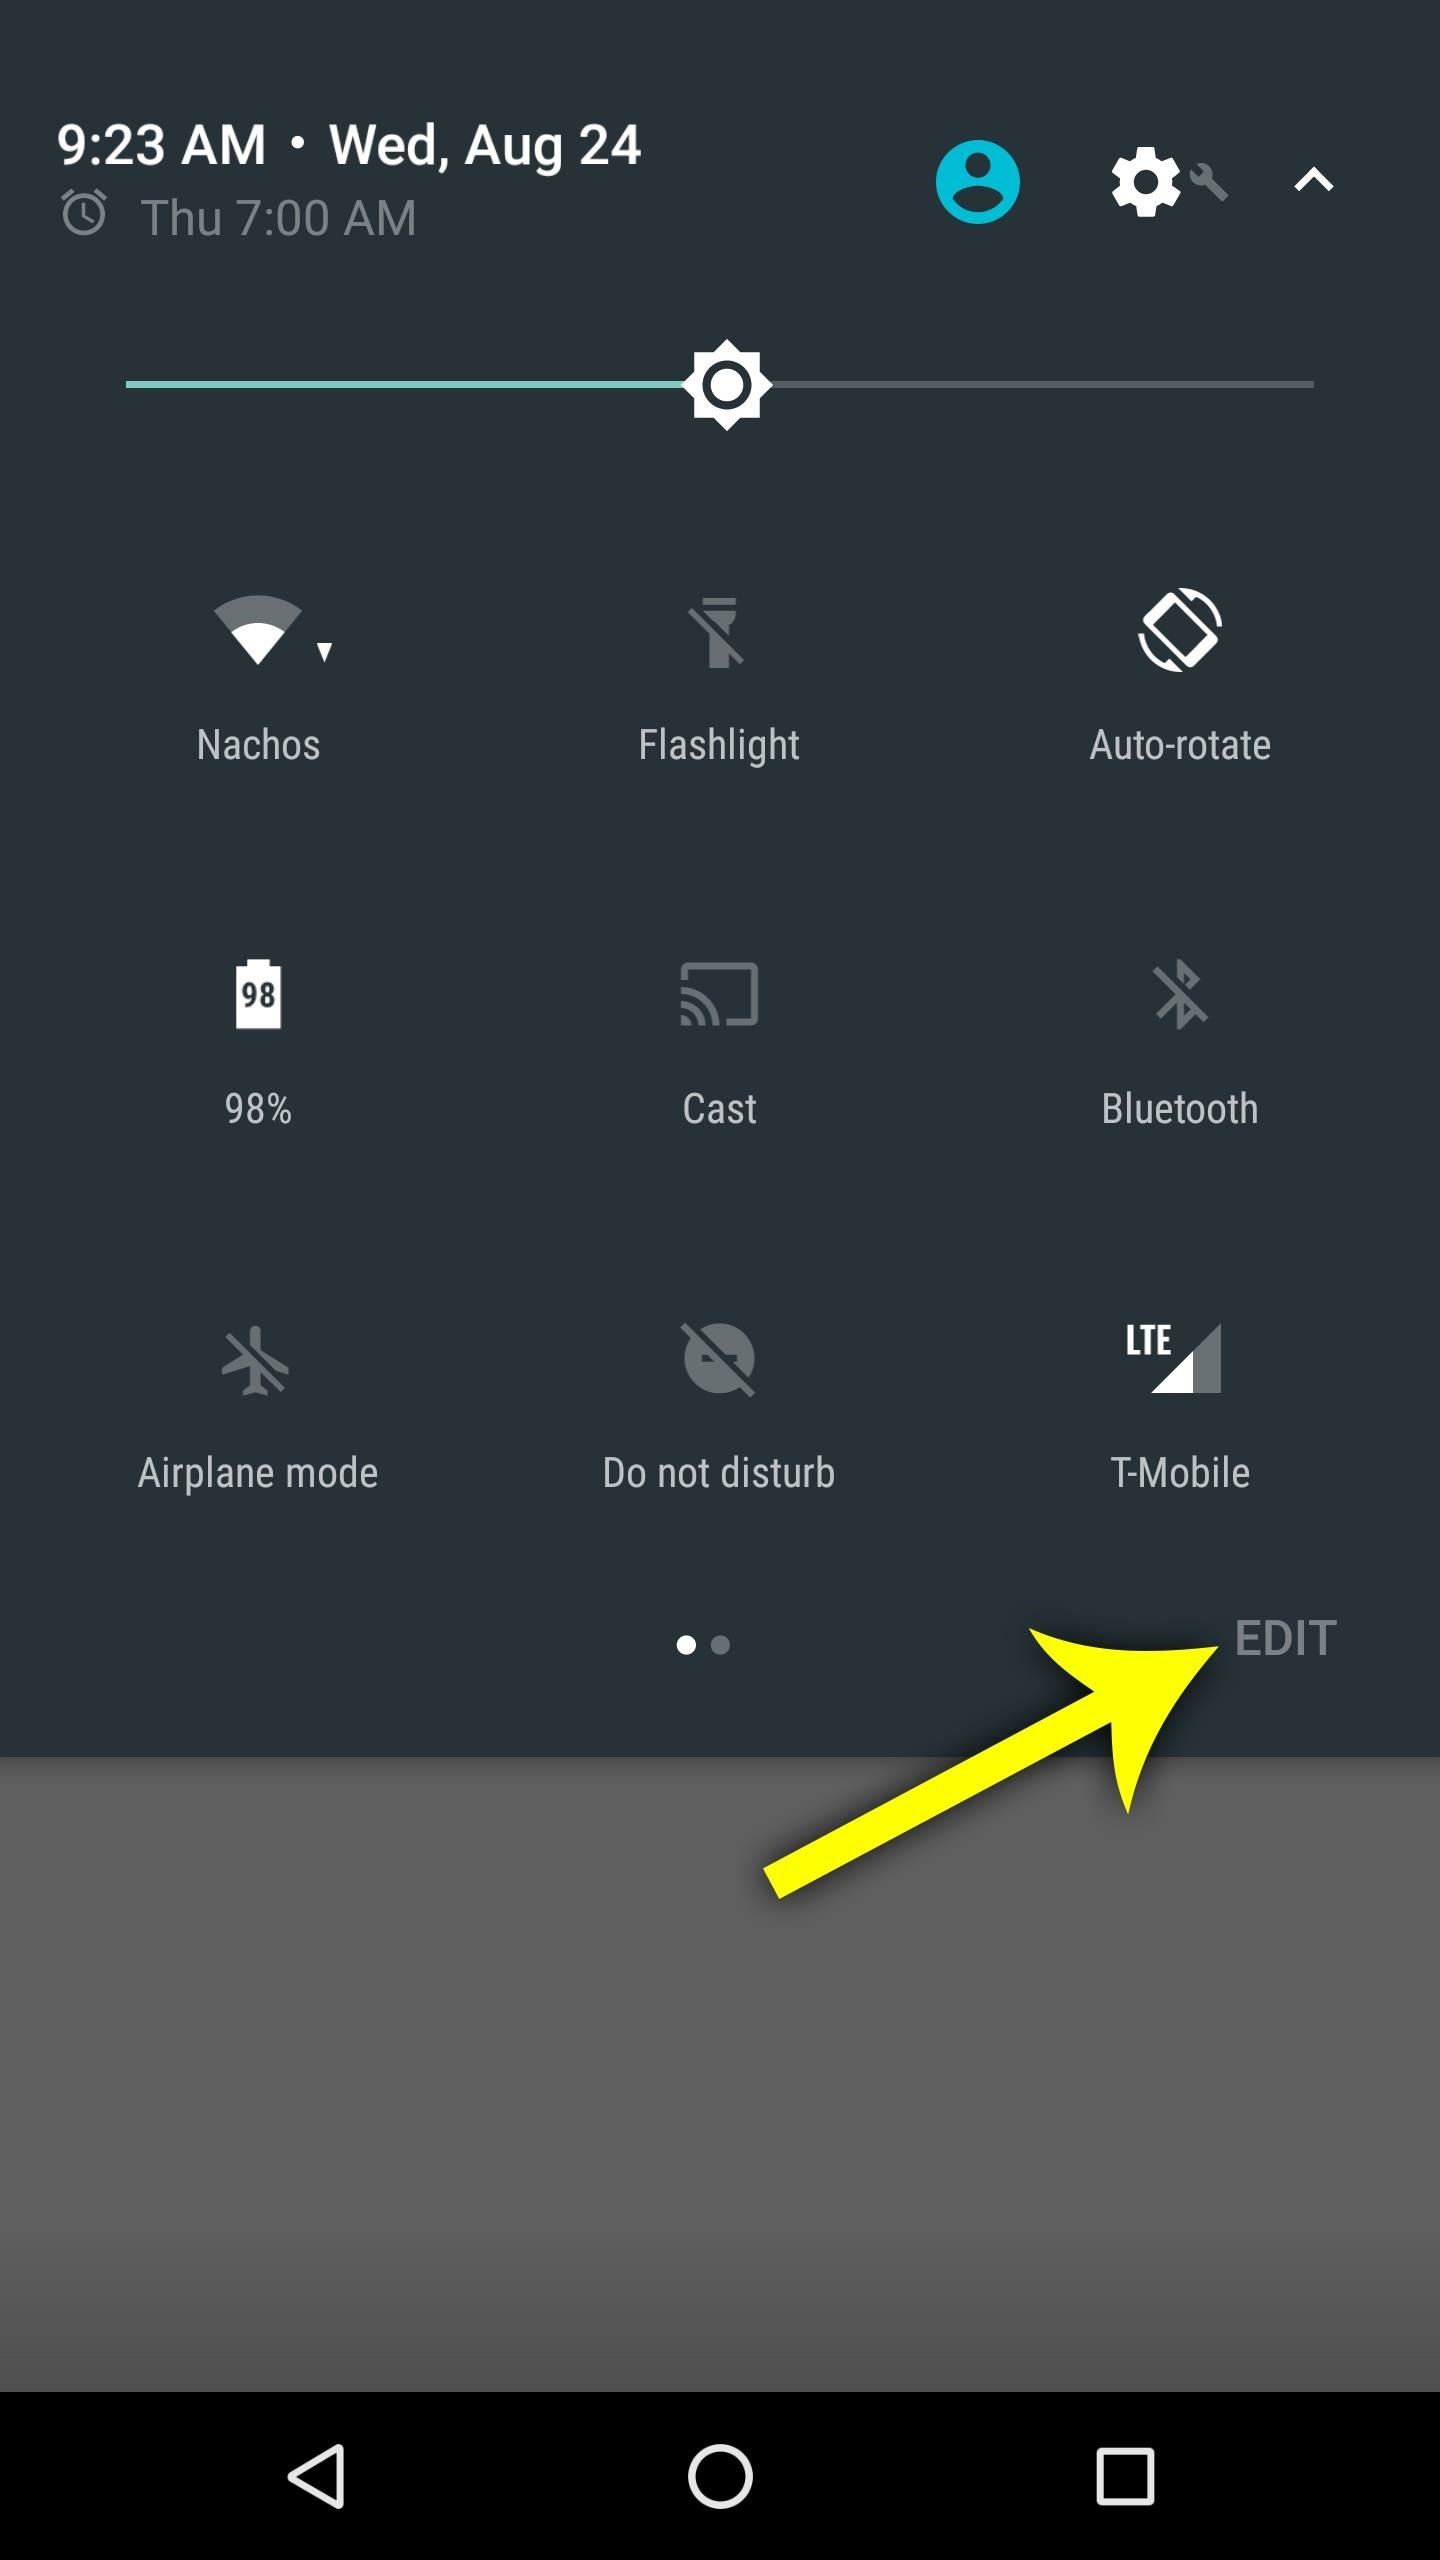 How to Add Your Own Quick Settings Tiles in Android Nougat